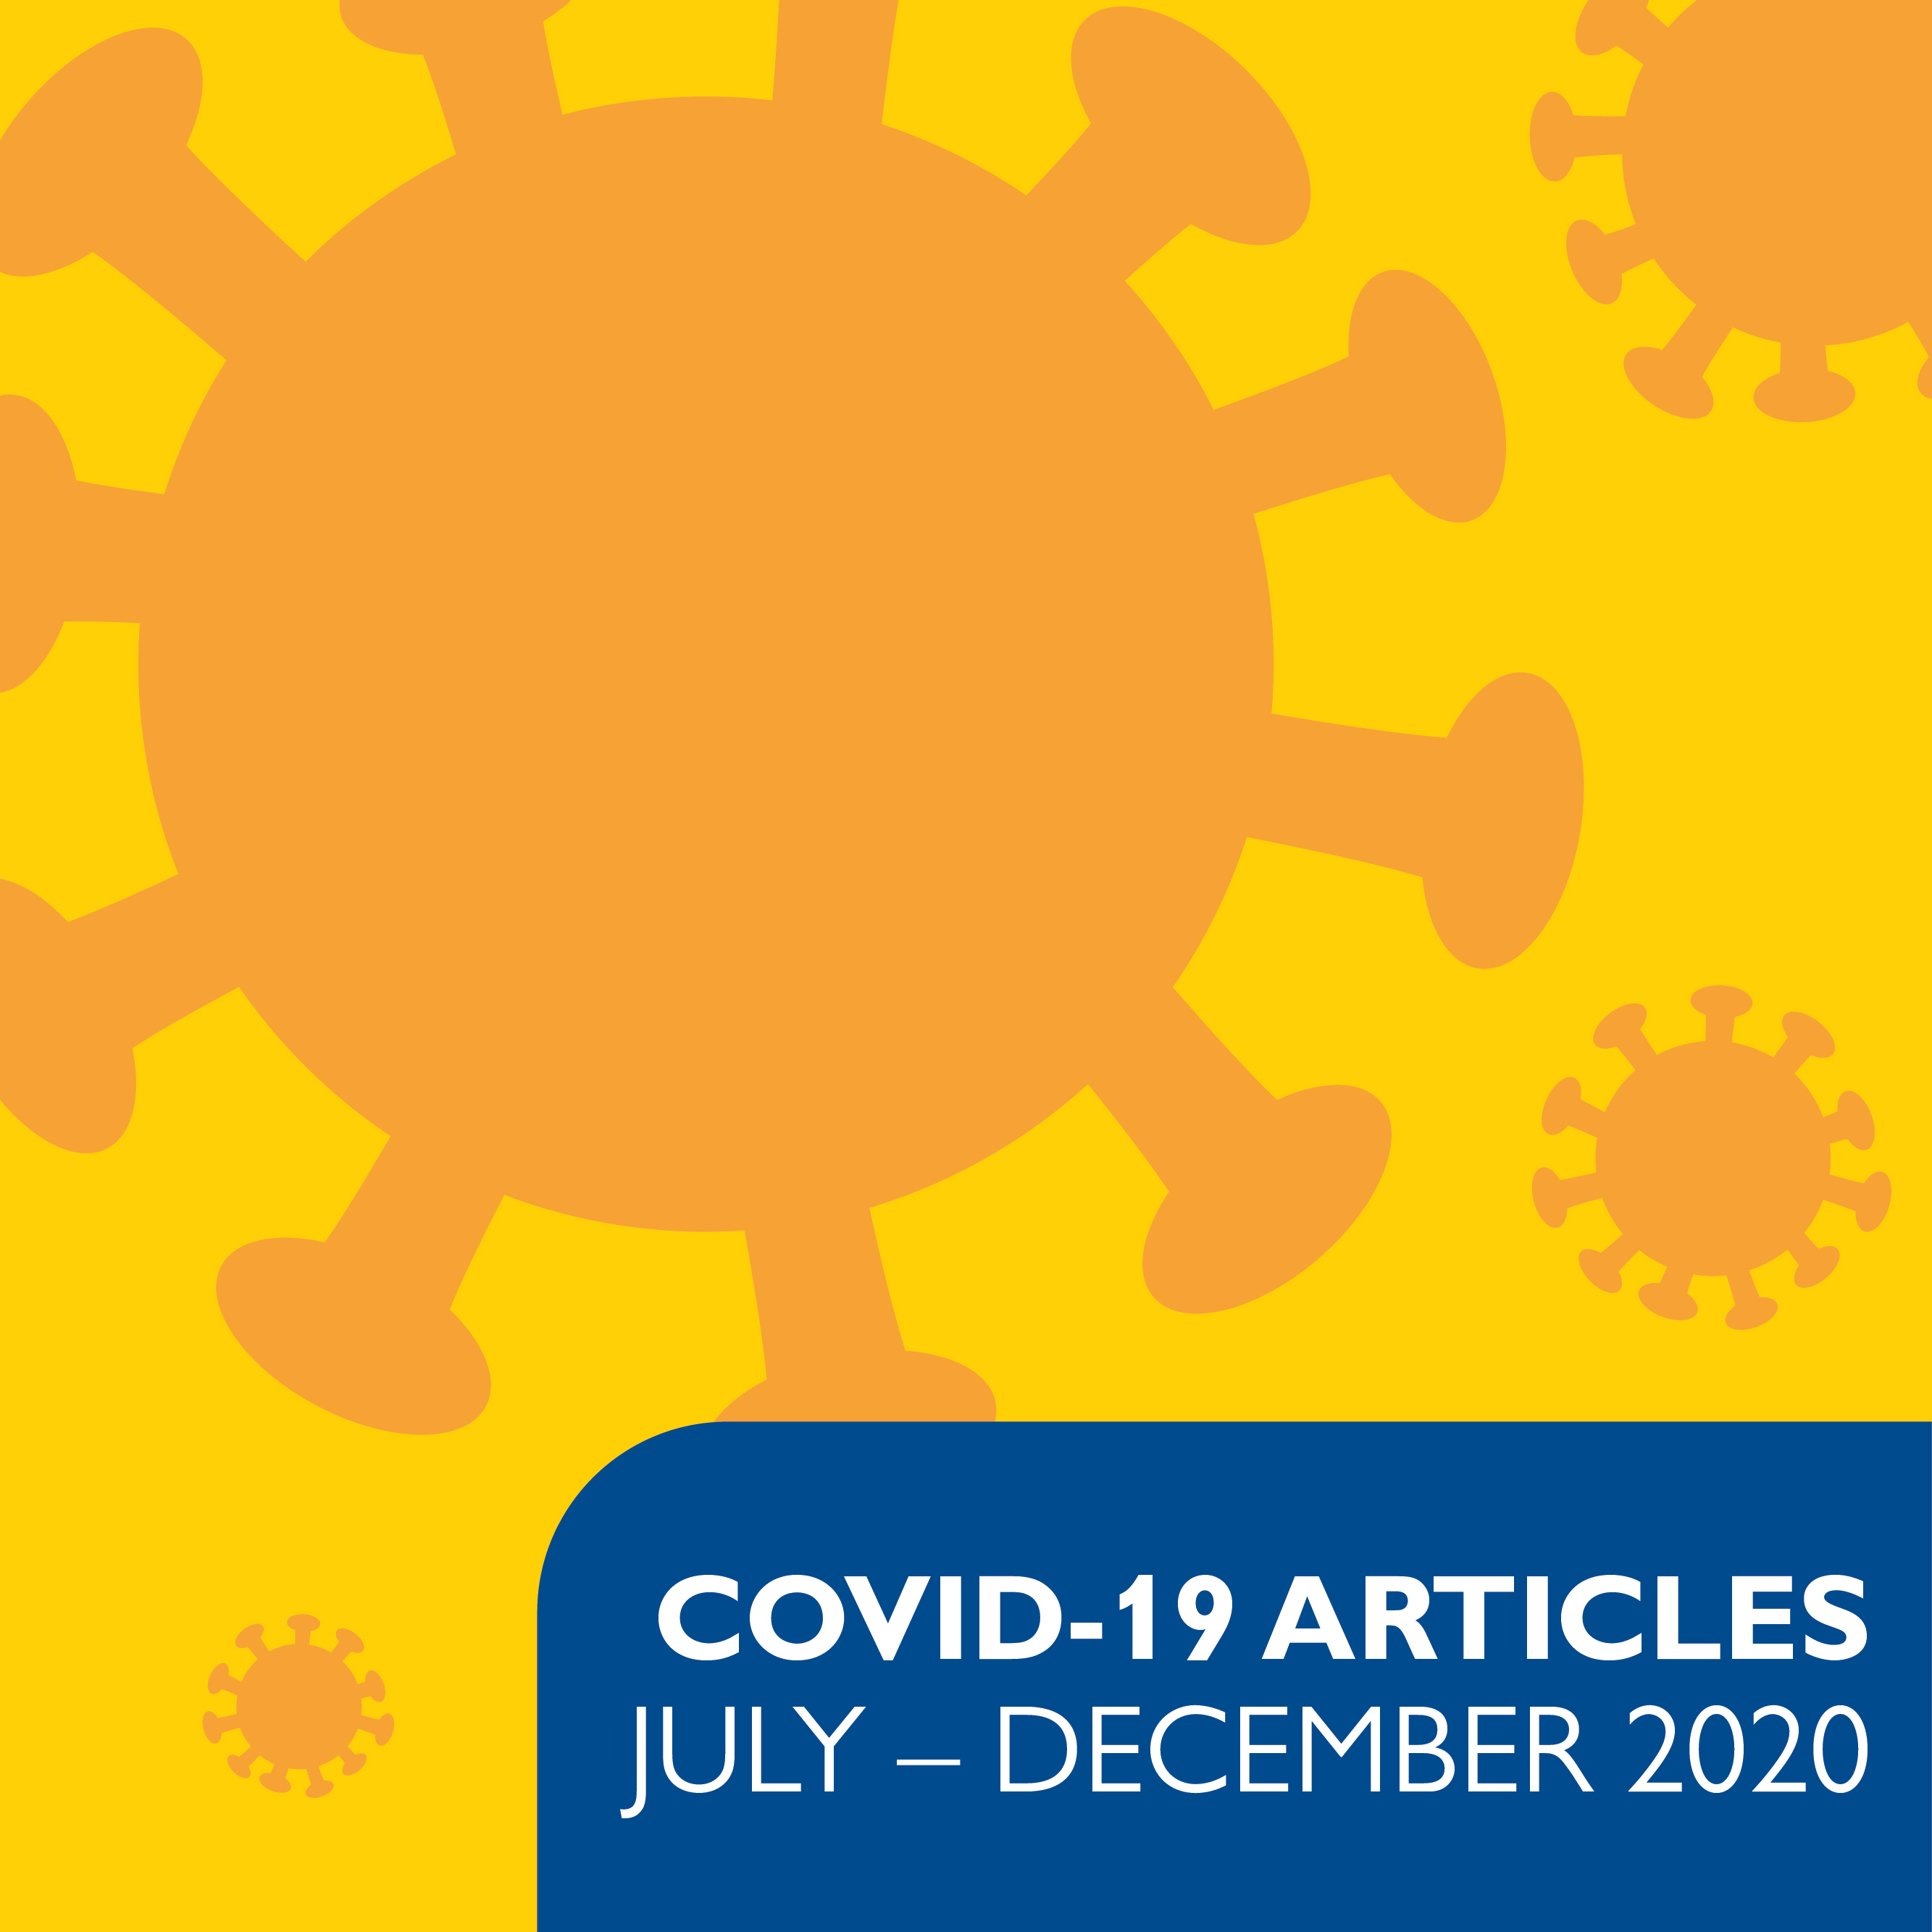 An illustration of Covid proteins floating on a yellow background.